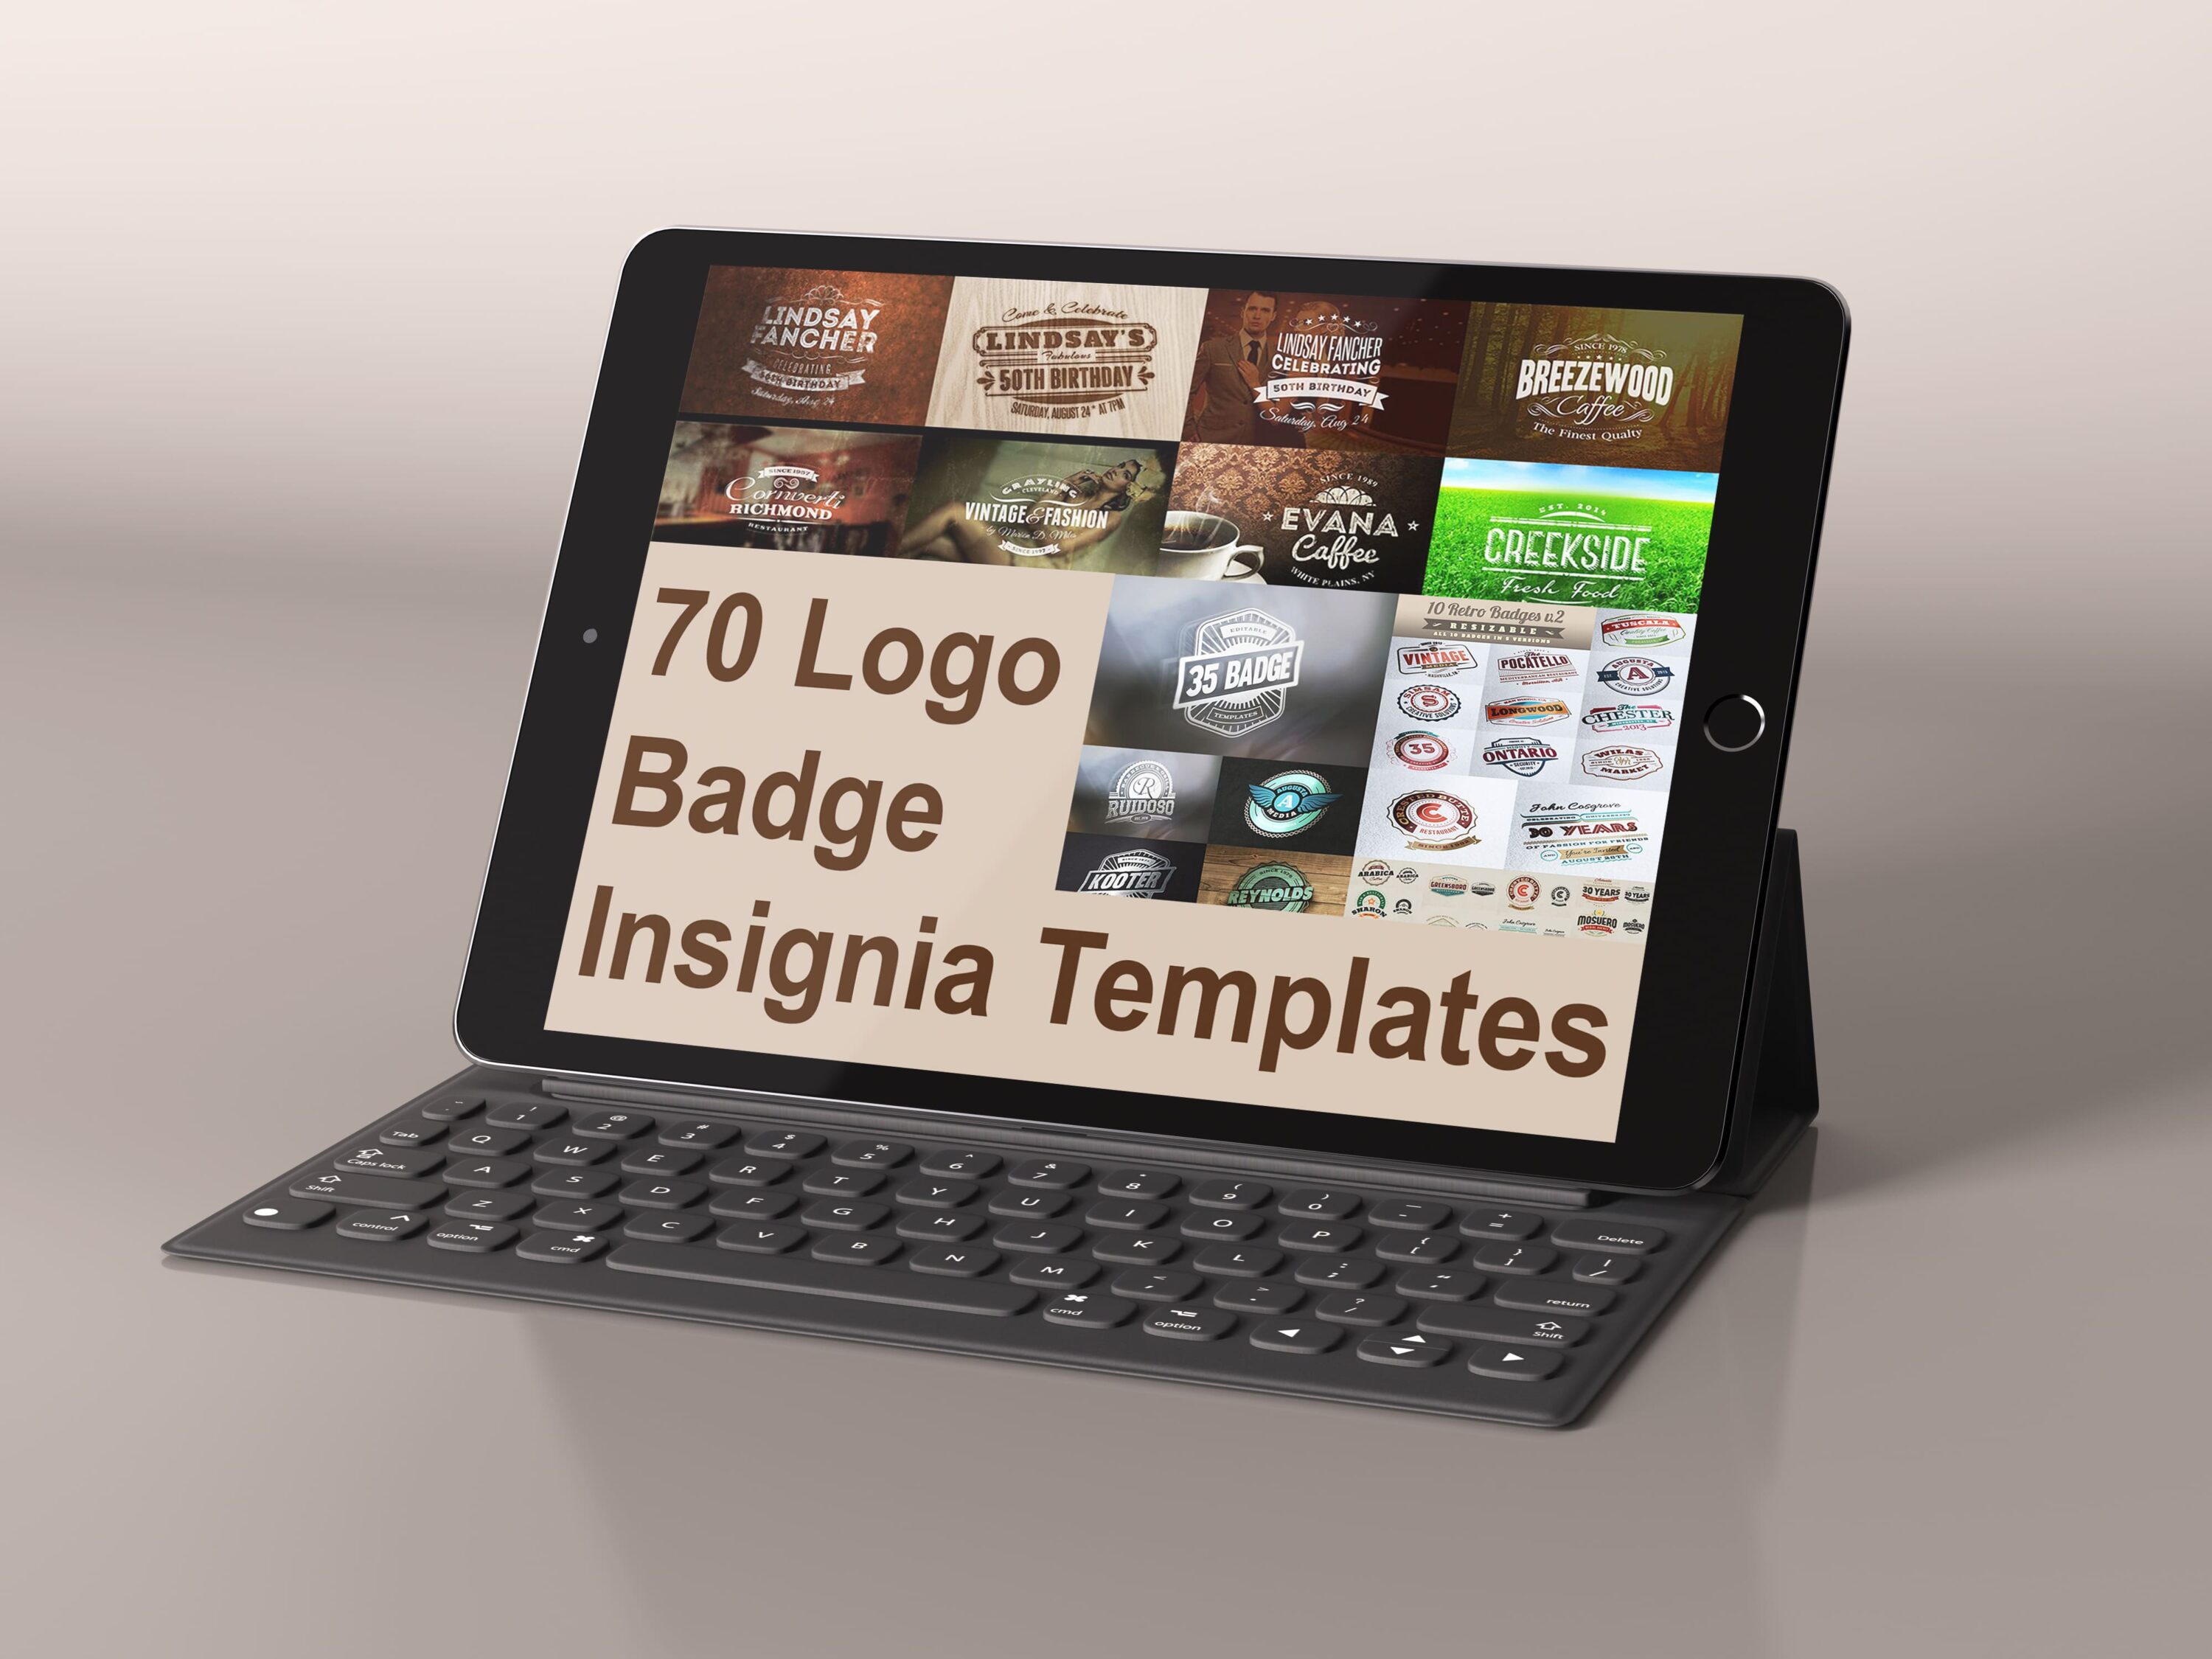 Tablet option of the 70 Logo / Badge / Insignia Templates.